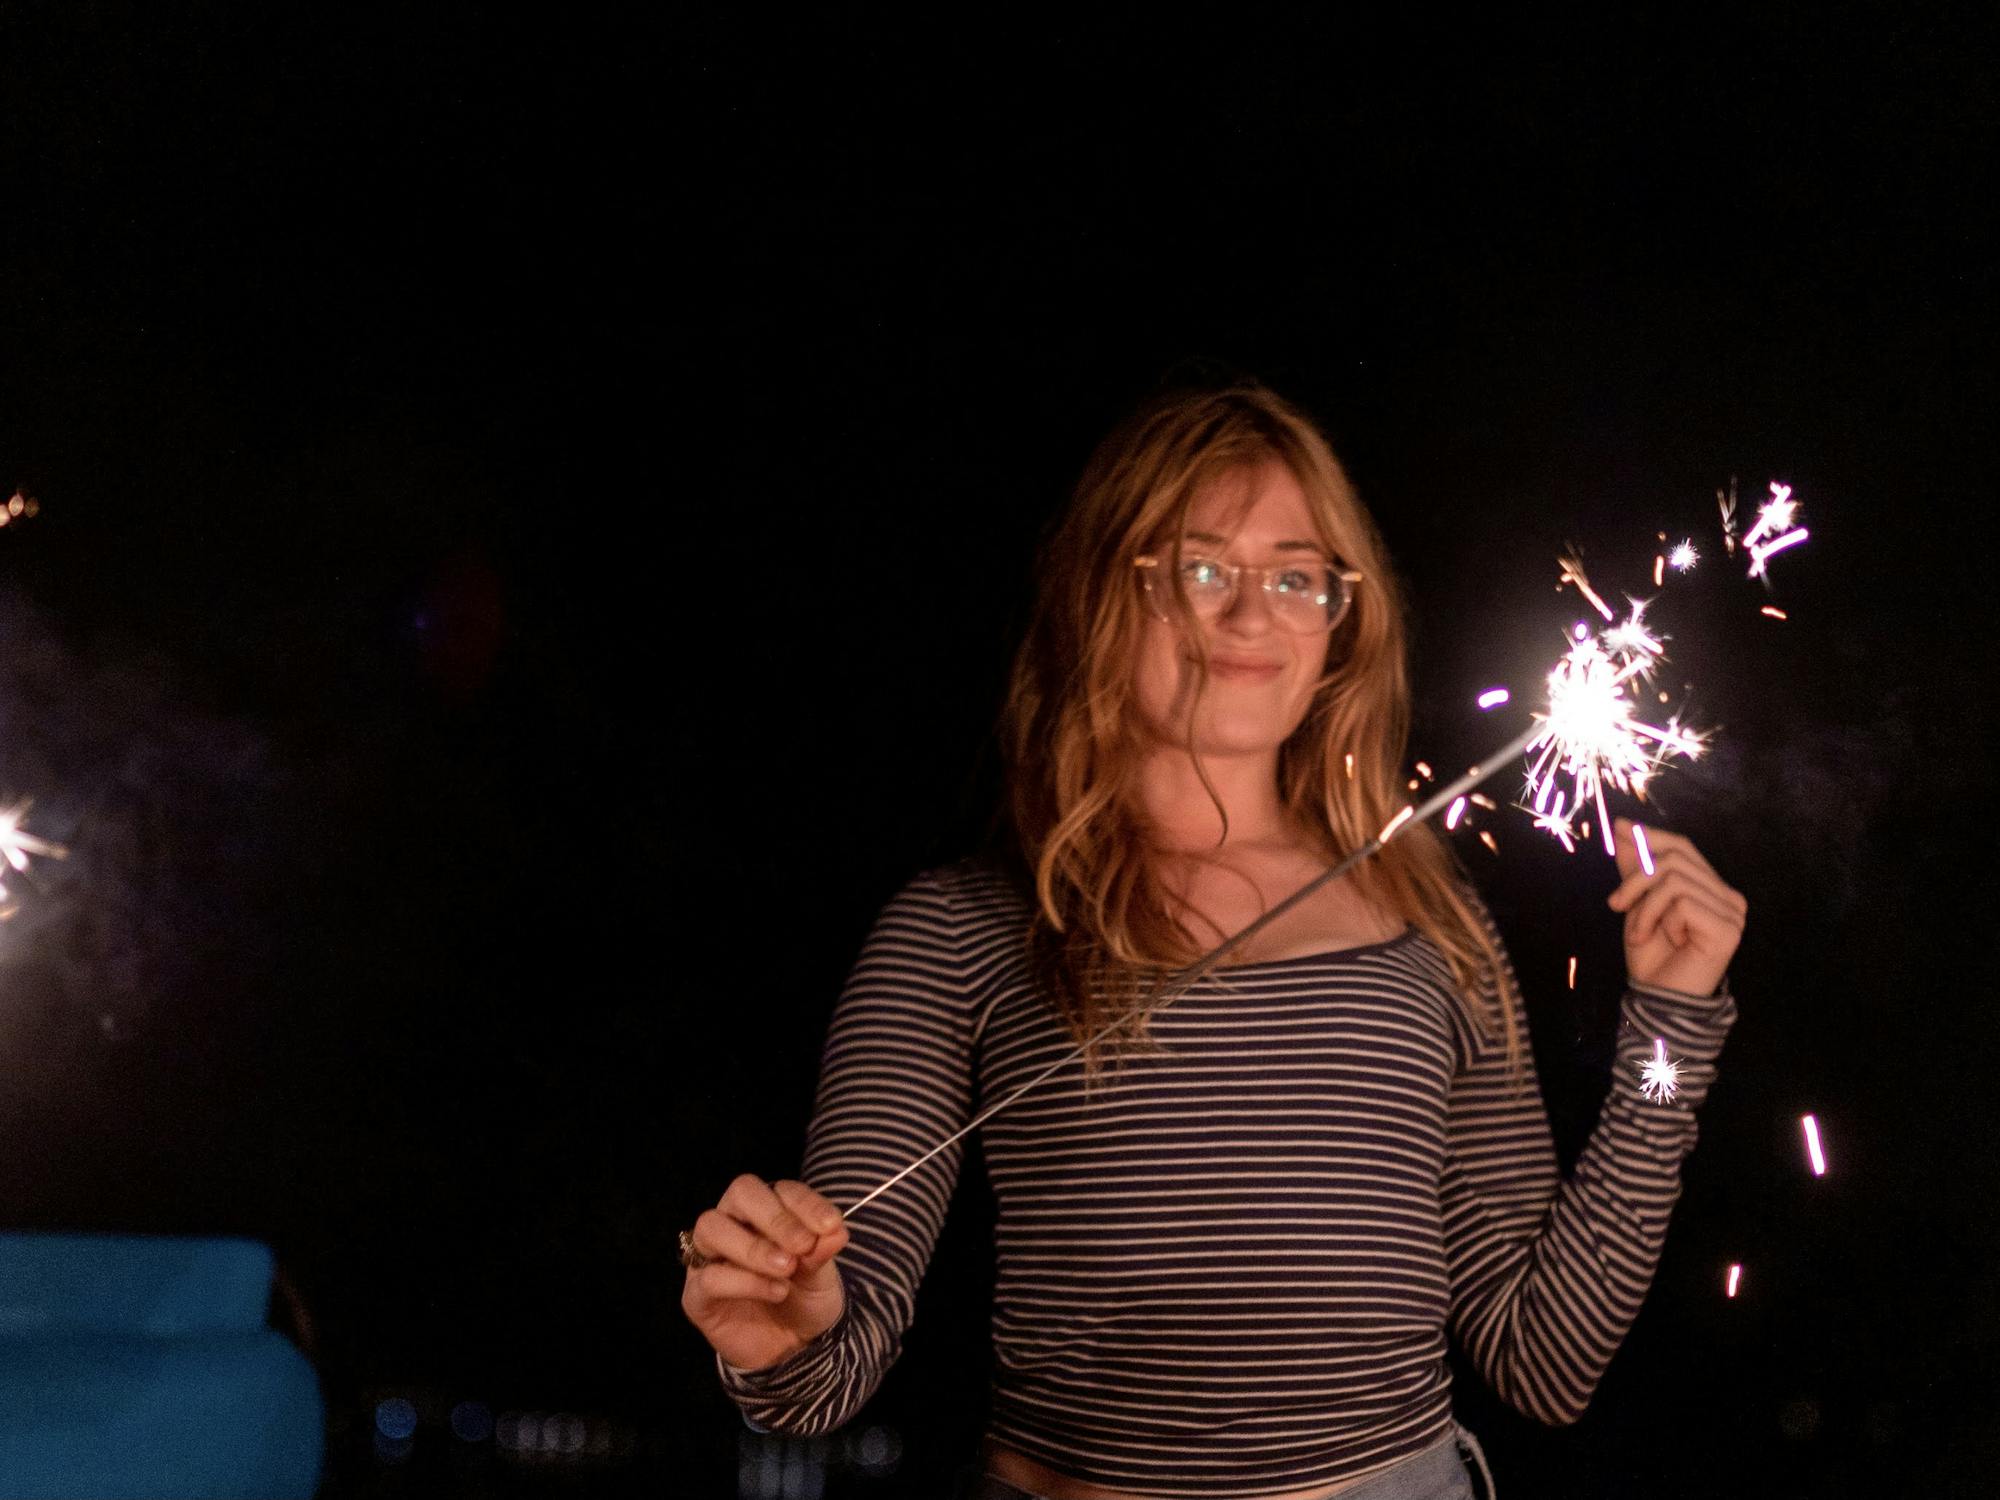 A young woman in the dark grins at the firework sparker in her hand